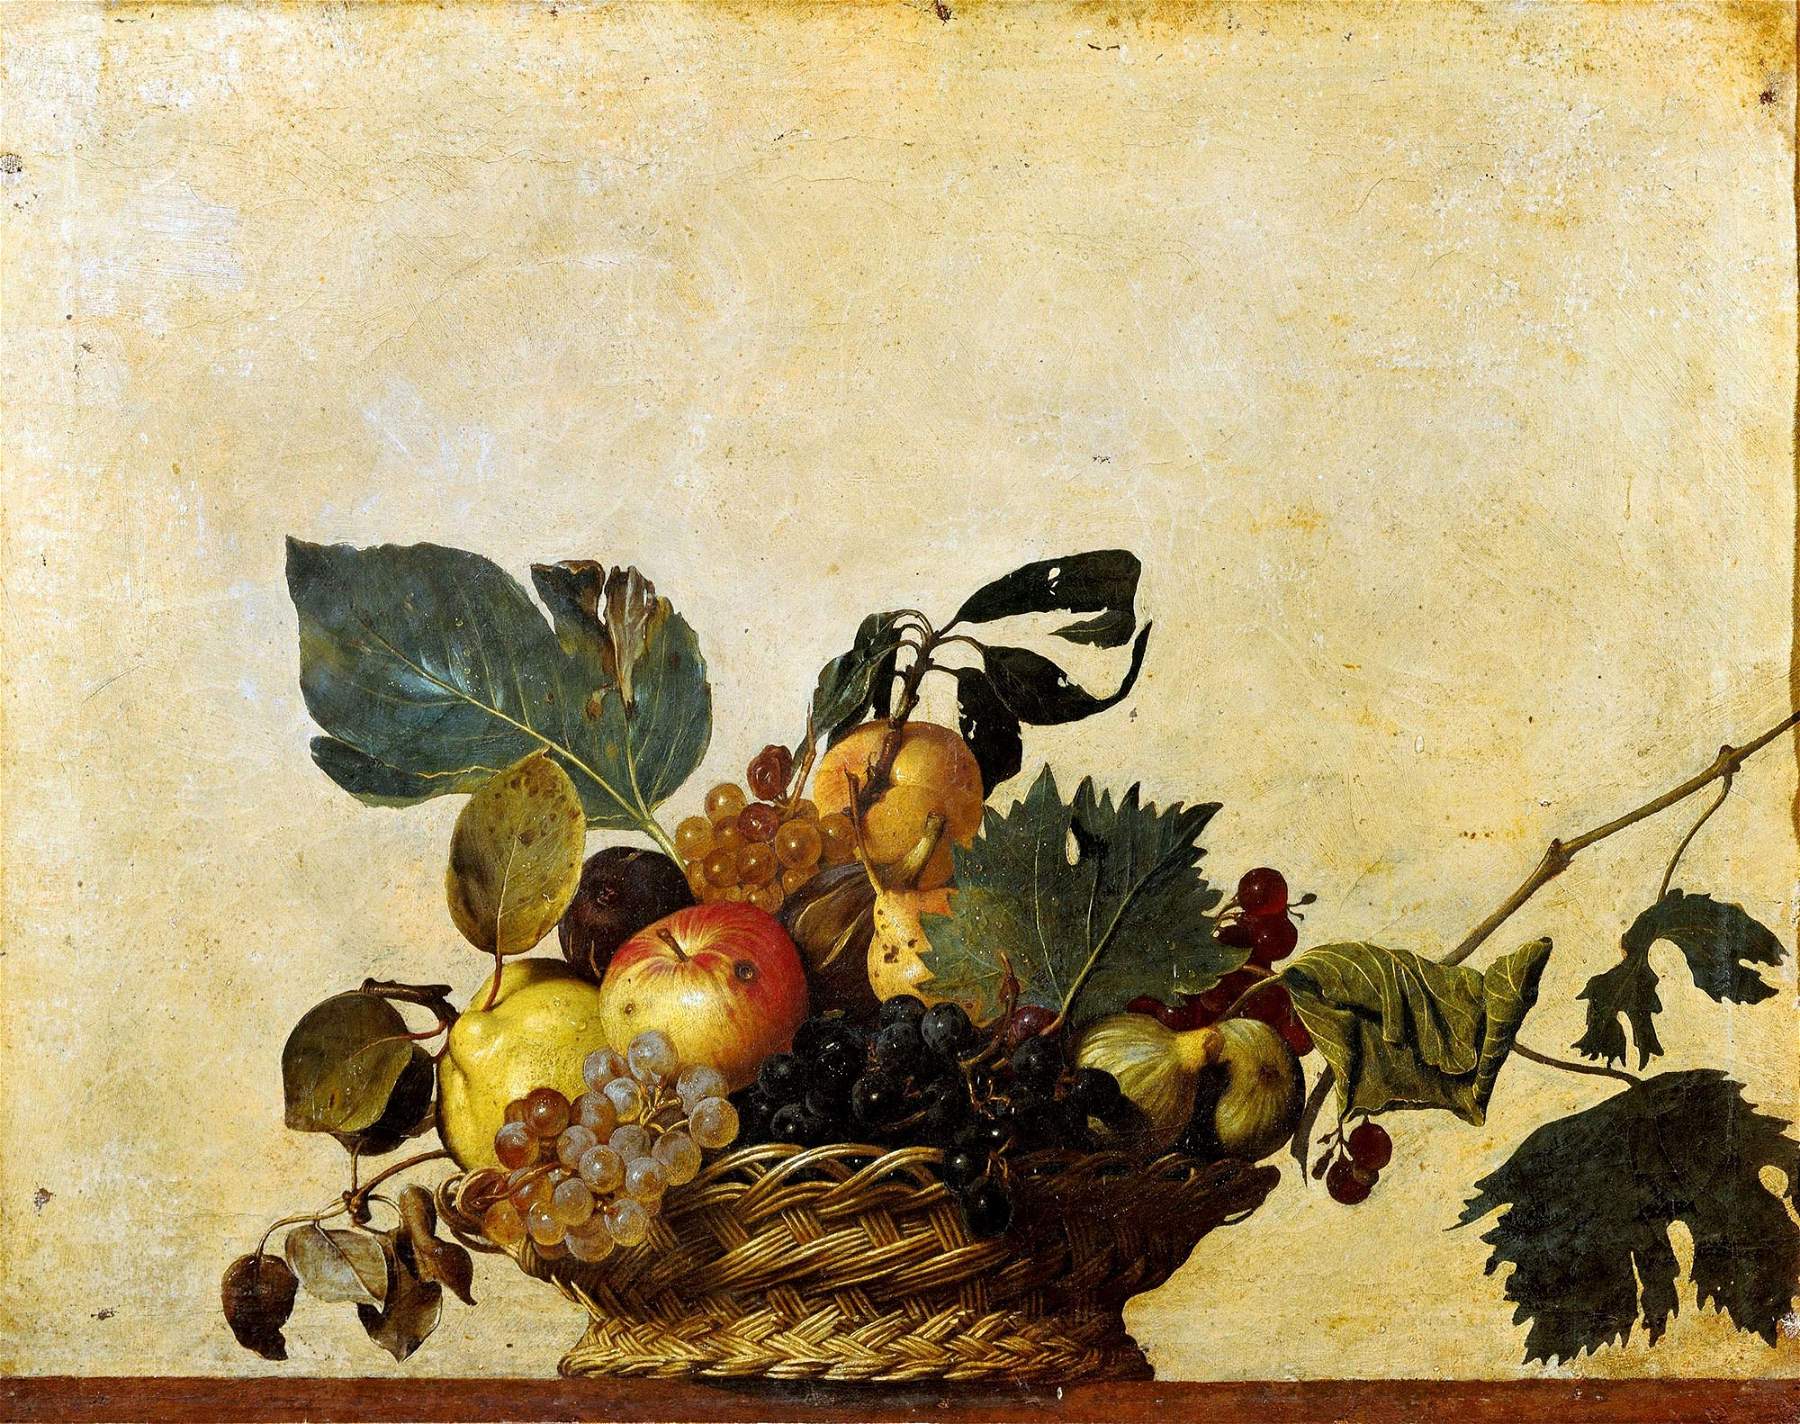 In Asti an exhibition on Caravaggio. At the center is his Basket of Fruit